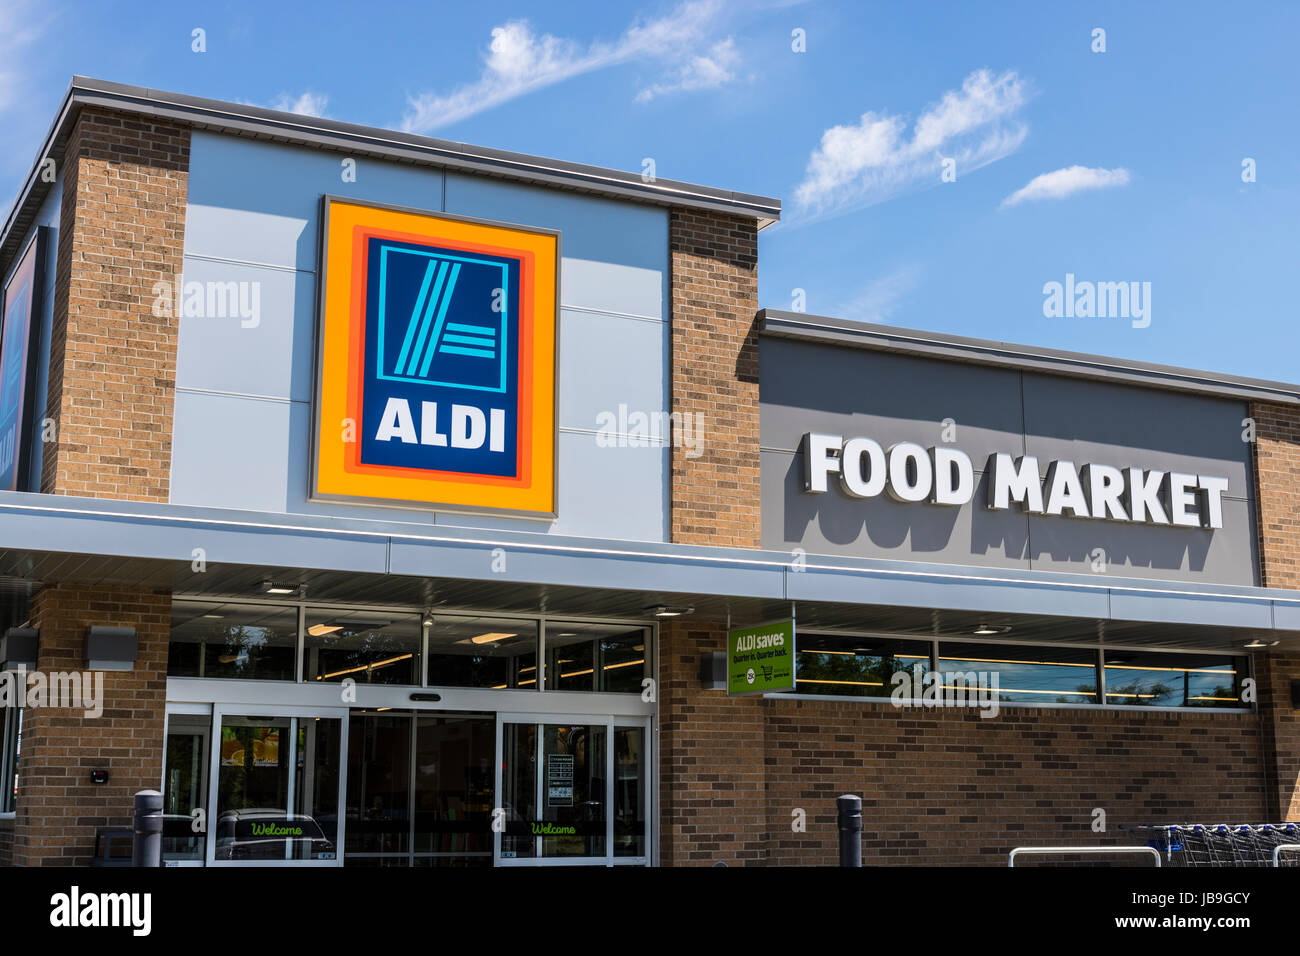 Indianapolis - Circa June 2017: Aldi Discount Supermarket. Aldi sells a range of grocery items, including produce, meat & dairy, at discount prices IX Stock Photo